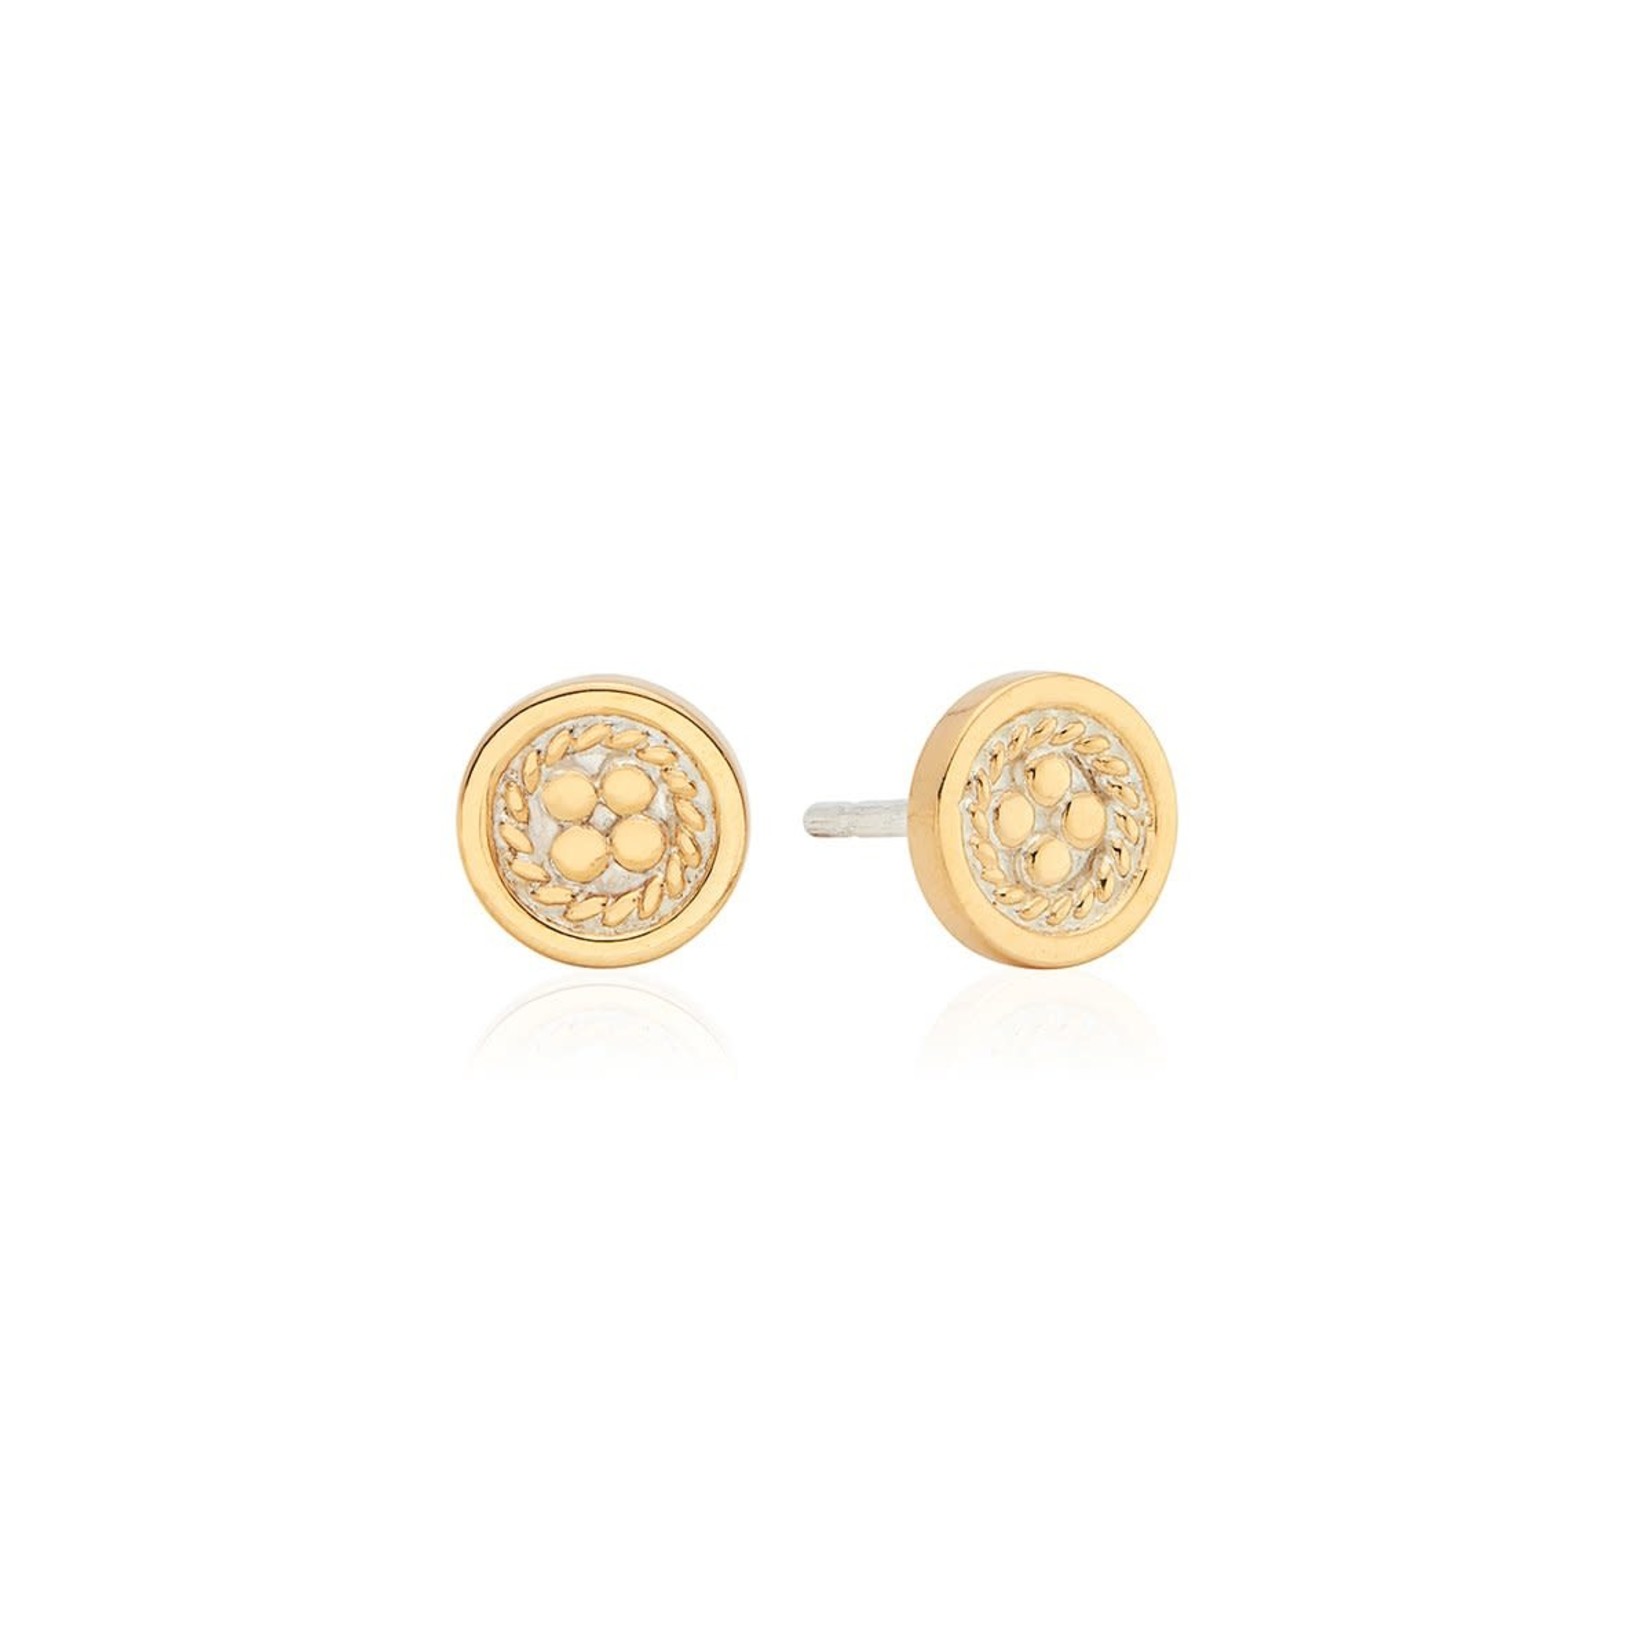 Classic Smooth Border Mini Stud Earrings - 18k gold plate over silver